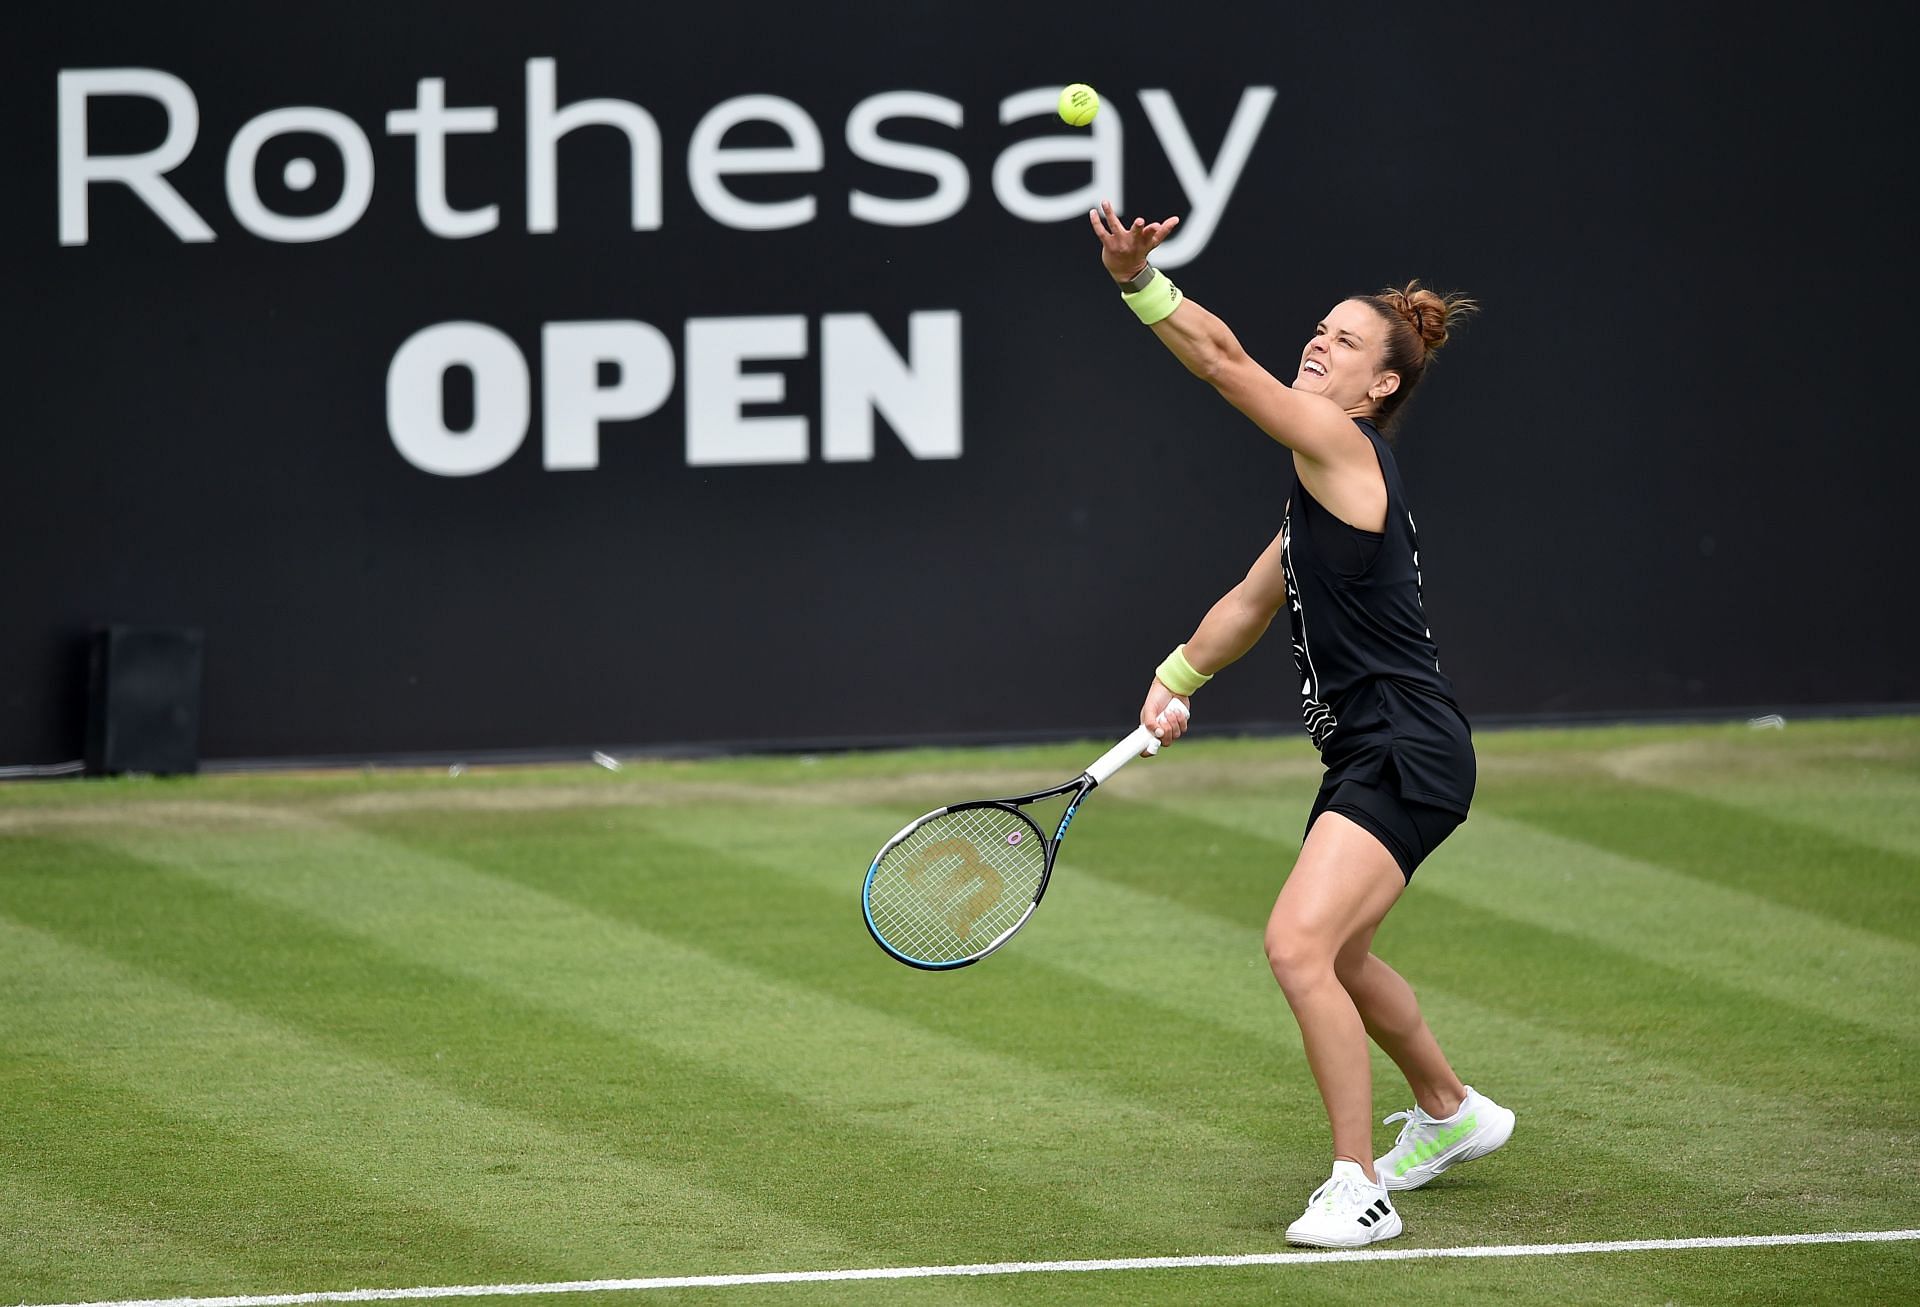 Sakkari serves during her first-round match at the Rothesay Open in Nottingham